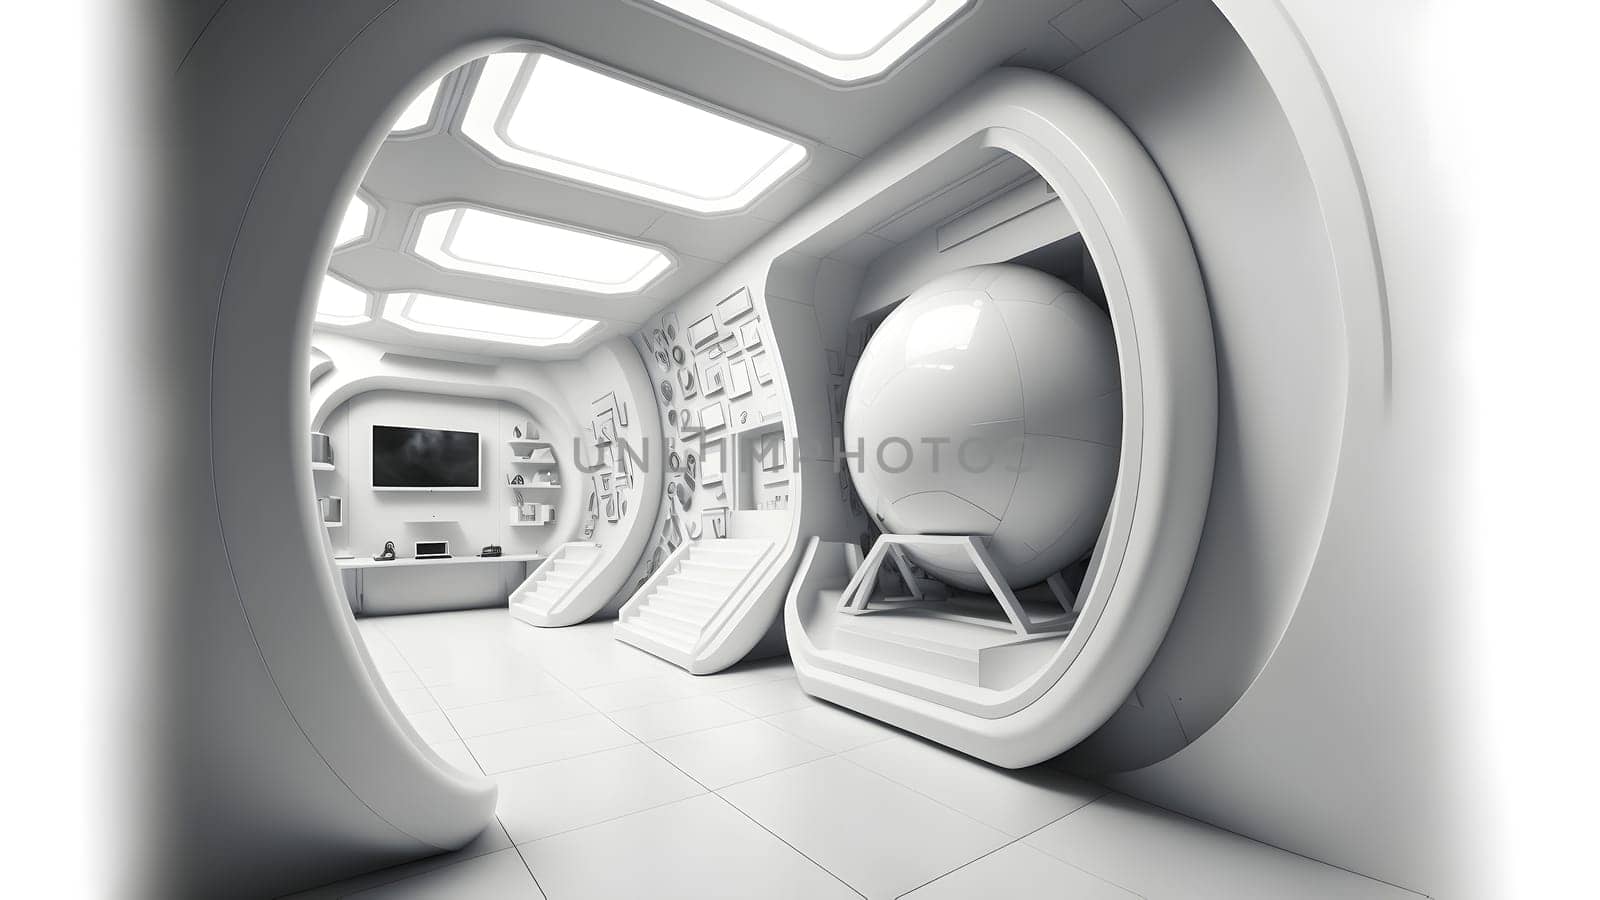 white interior of utopian futuristic moonbase, neural network generated art. Digitally generated image. Not based on any actual scene or pattern.